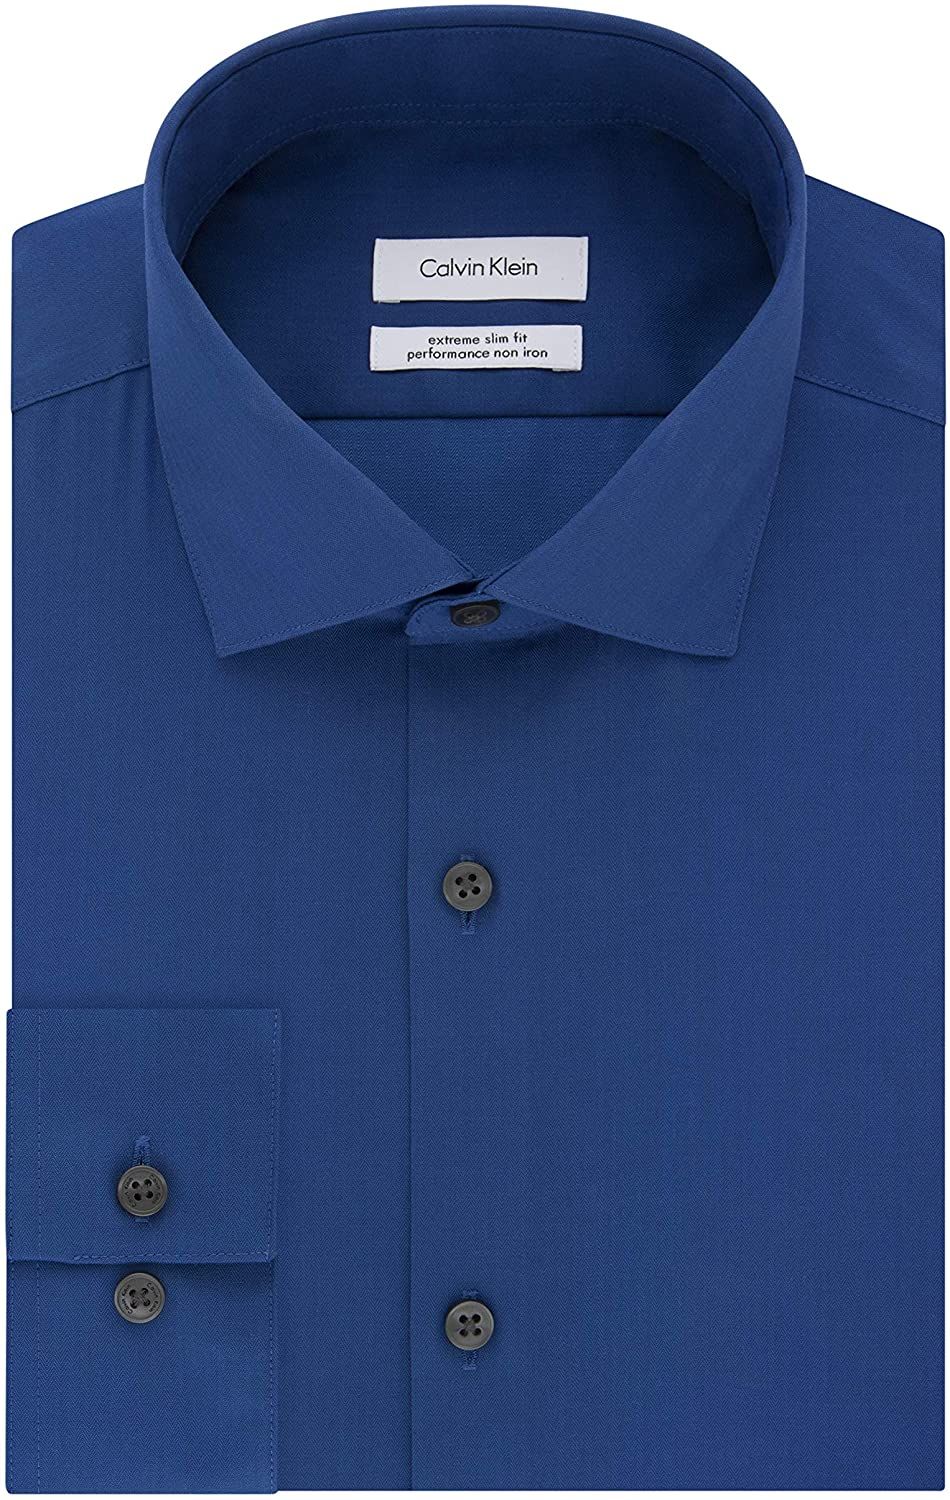 <br>Color: Blues<br>Size Type: Regular<br>Dress Shirt Size: 15<br>Sleeve Length: 34/35<br>Fit: Slim Fit, Fitted<br>Collar: Spread<br>Pattern: Stripes<br>Cuff Style: Standard Cuff<br>Material: 100% Cotton